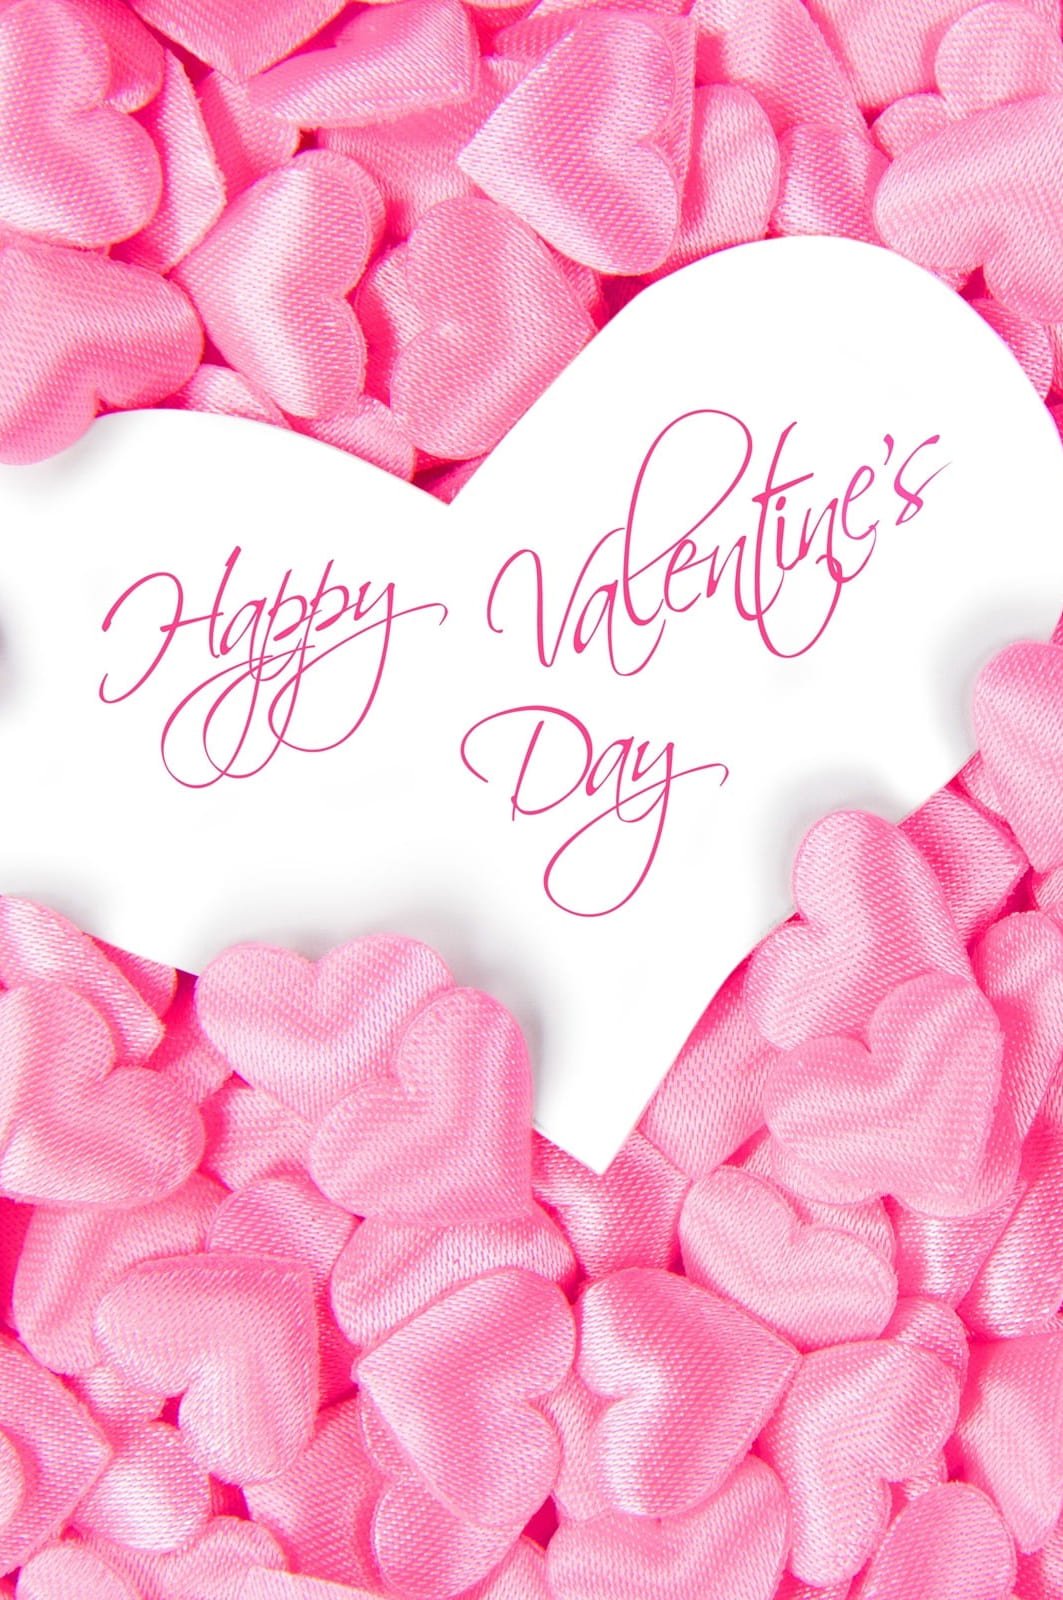 HD wallpaper Happy Valentines Day cards pink love hearts